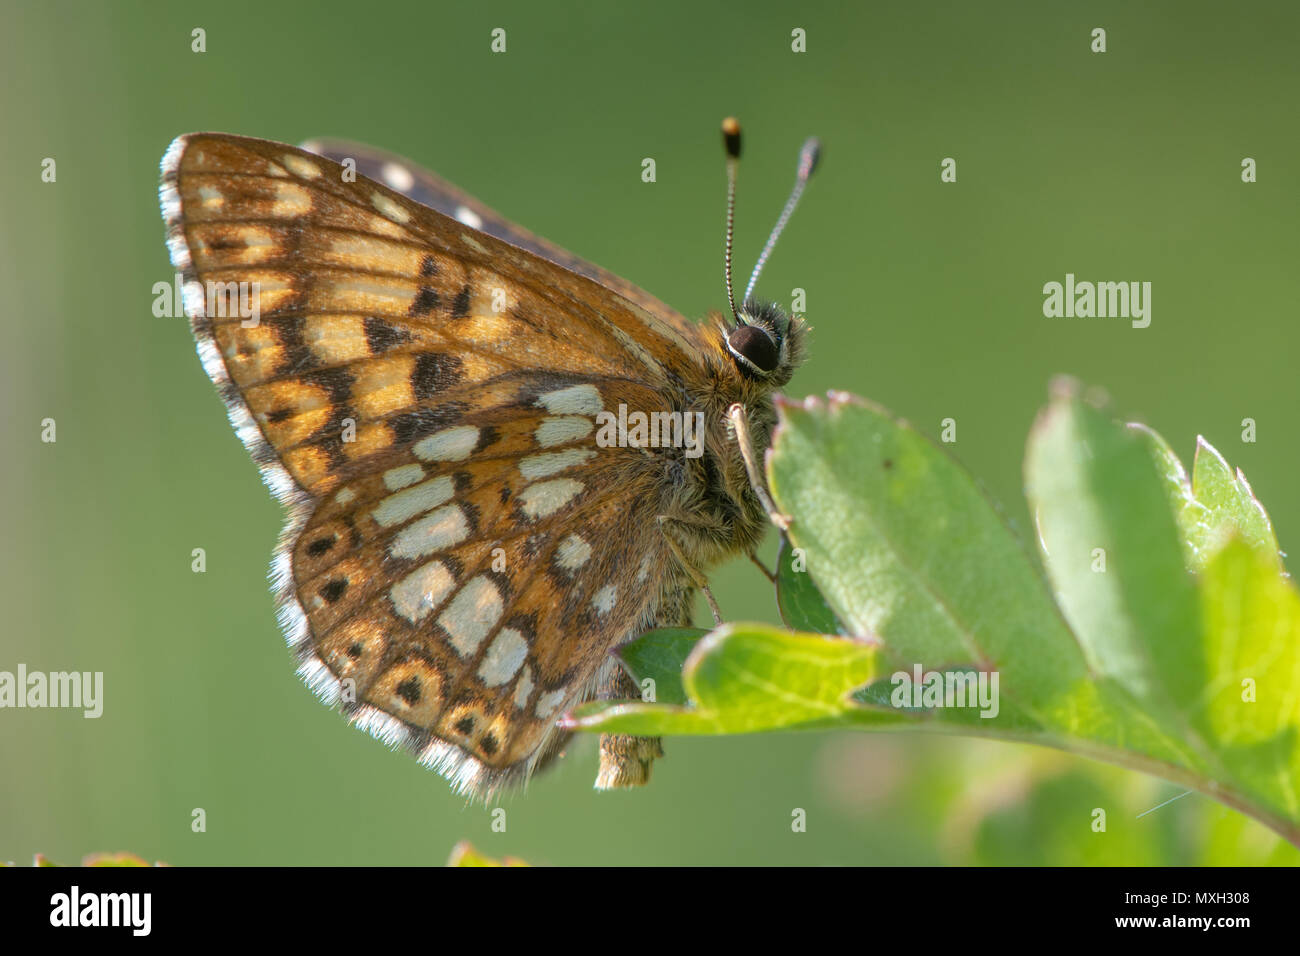 Duke of Burgundy fritillary butterfly (Hamearis lucina) underside. Underside of male insect in the family Riodinidae, perched on leaf Stock Photo